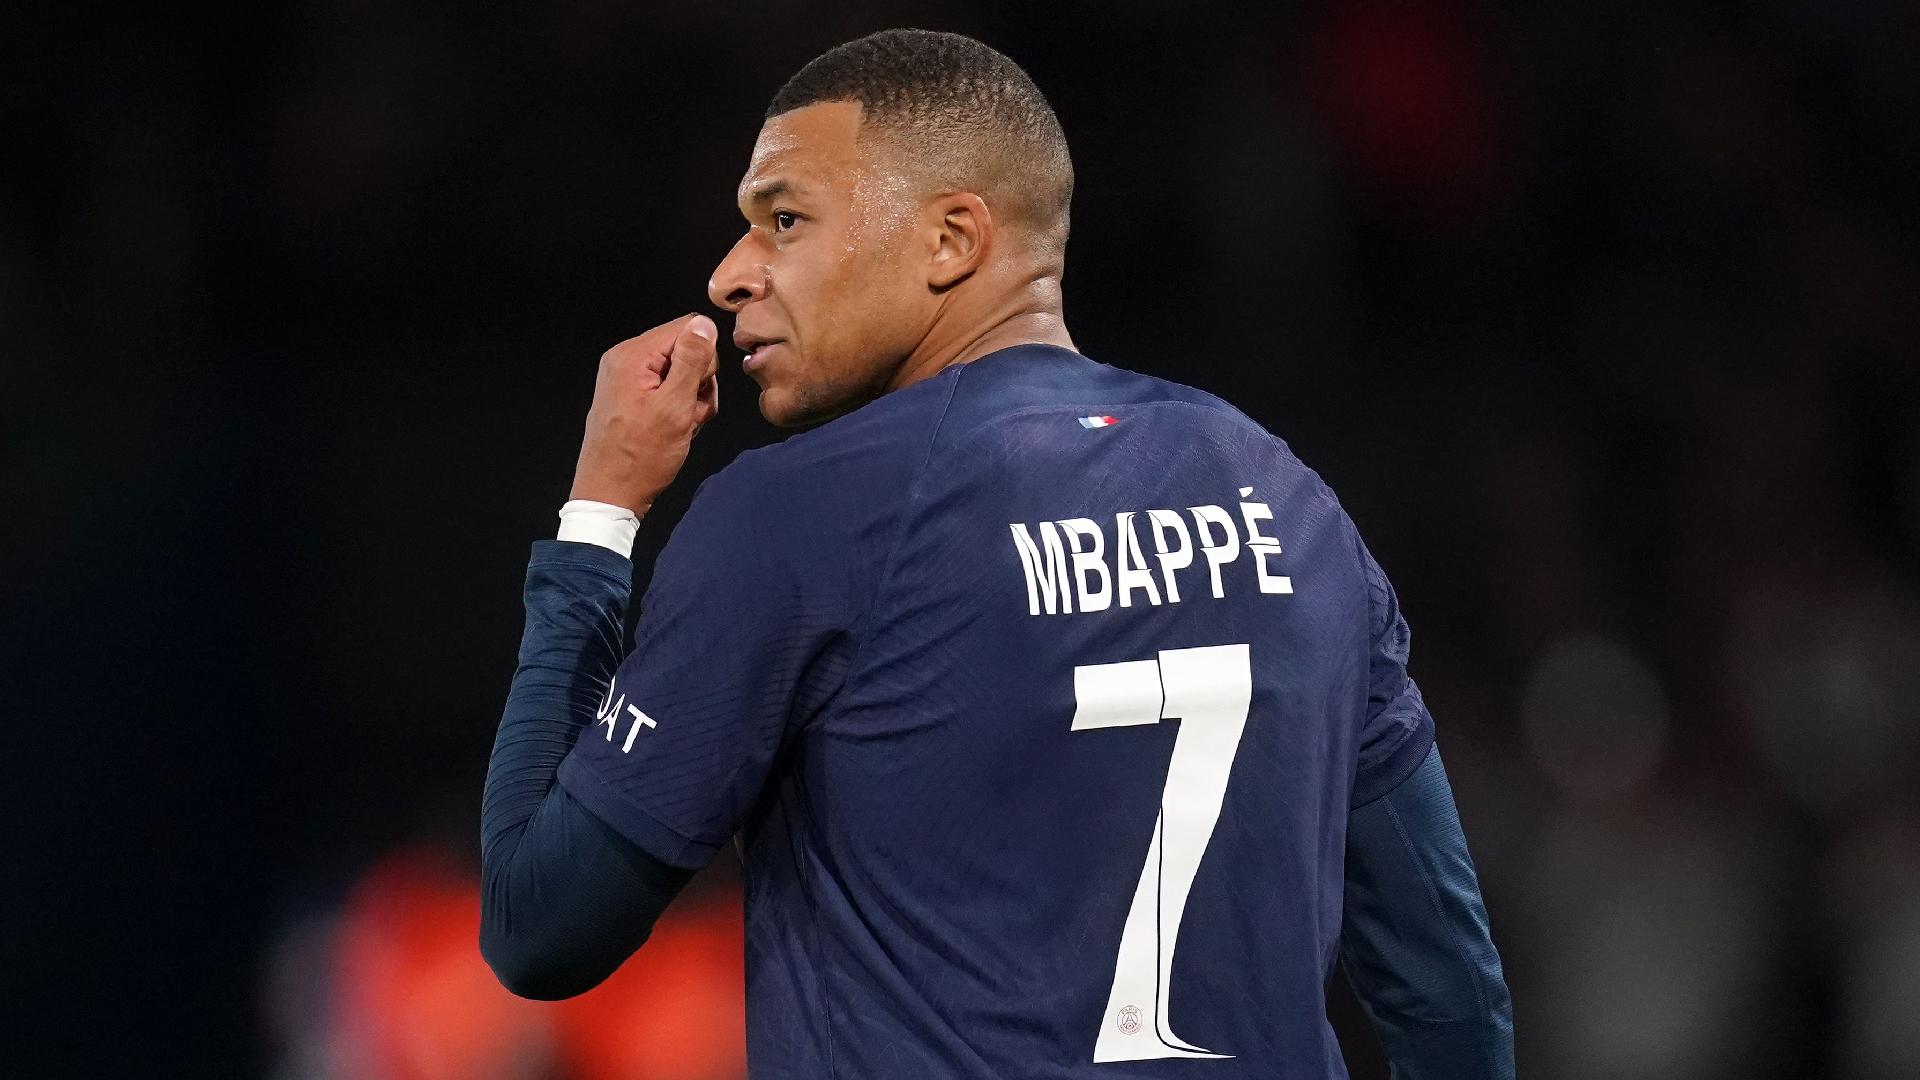 Mbappe not guaranteed of UCL playing time | beIN SPORTS